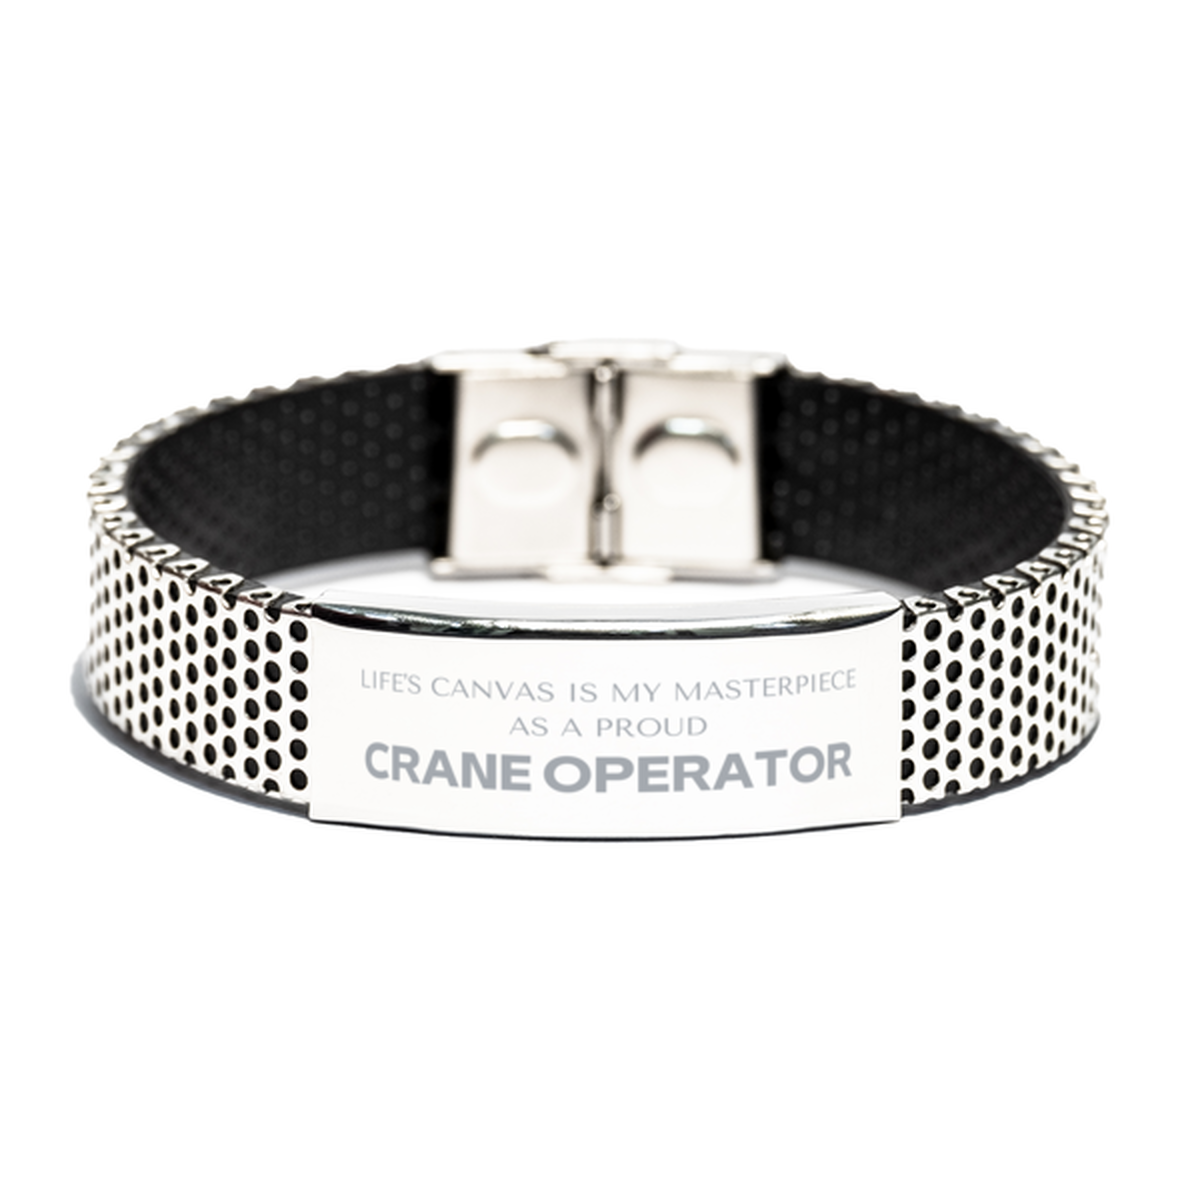 Proud Crane Operator Gifts, Life's canvas is my masterpiece, Epic Birthday Christmas Unique Stainless Steel Bracelet For Crane Operator, Coworkers, Men, Women, Friends